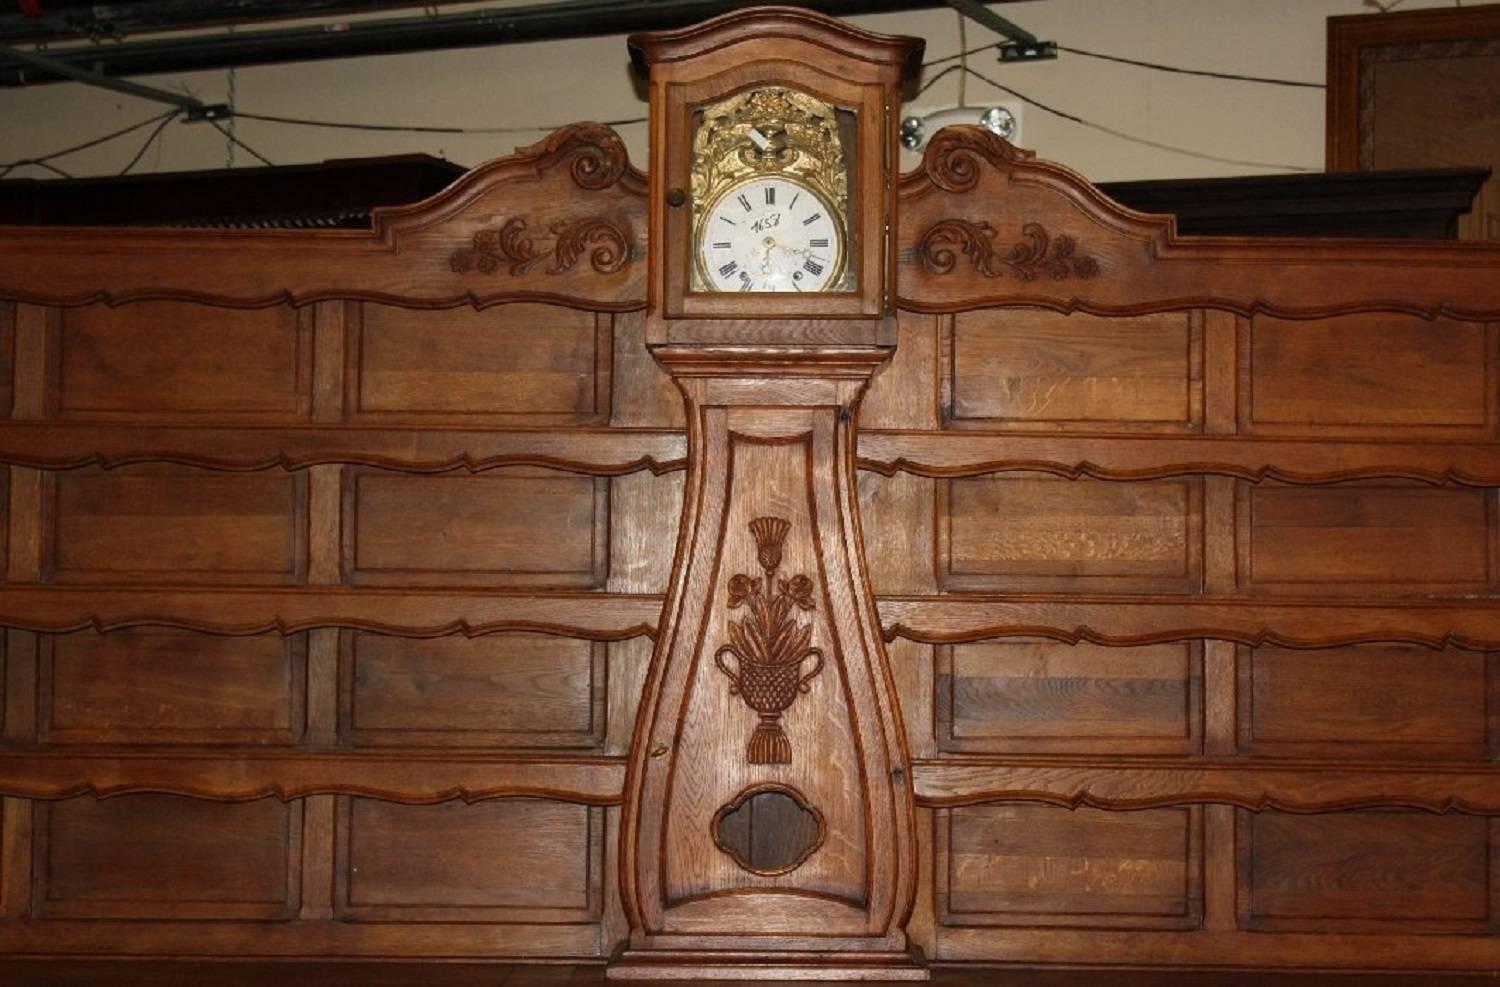 This magnificent piece is perfect for a country kitchen. It is a monumental carved oak buffet or vaisselier which was designed as a focal point for the room. It features a large central clock and open shelves to hold plates, glassware, and serving